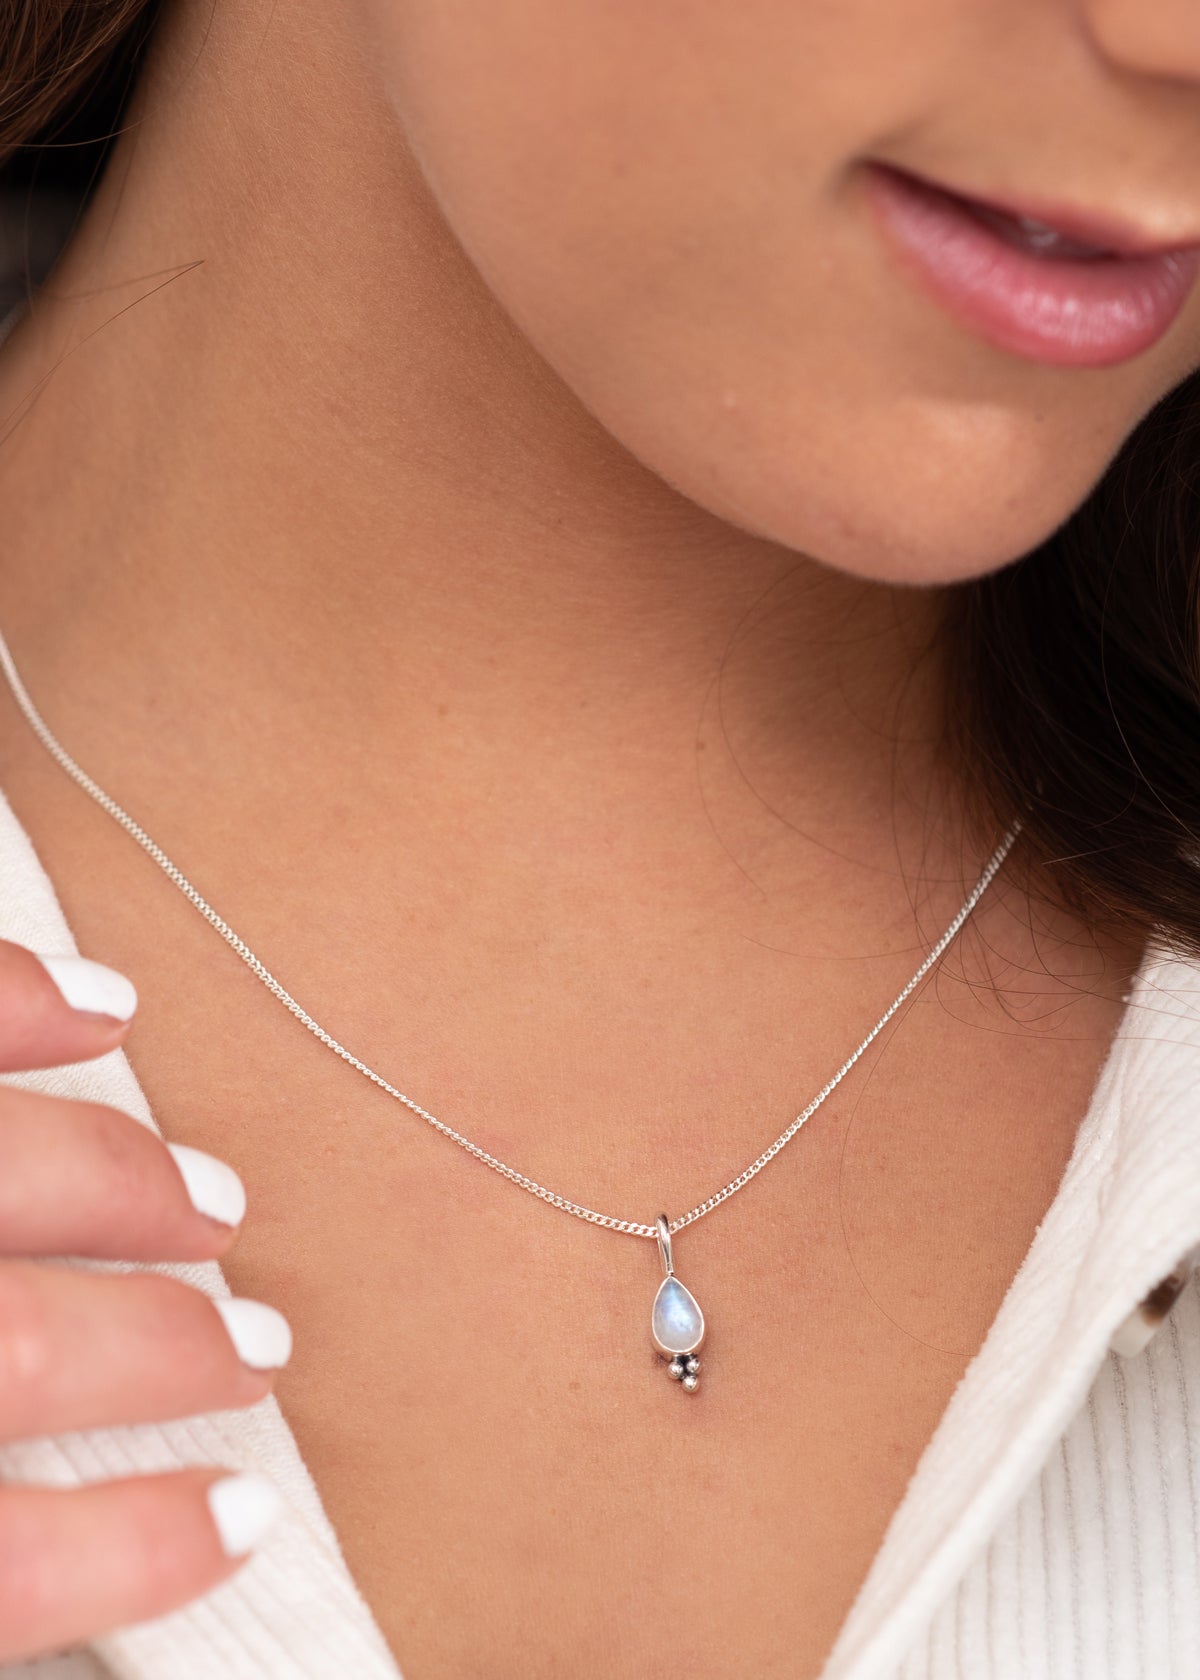 Moonstone Teardrop Necklace by Tropical Tribe